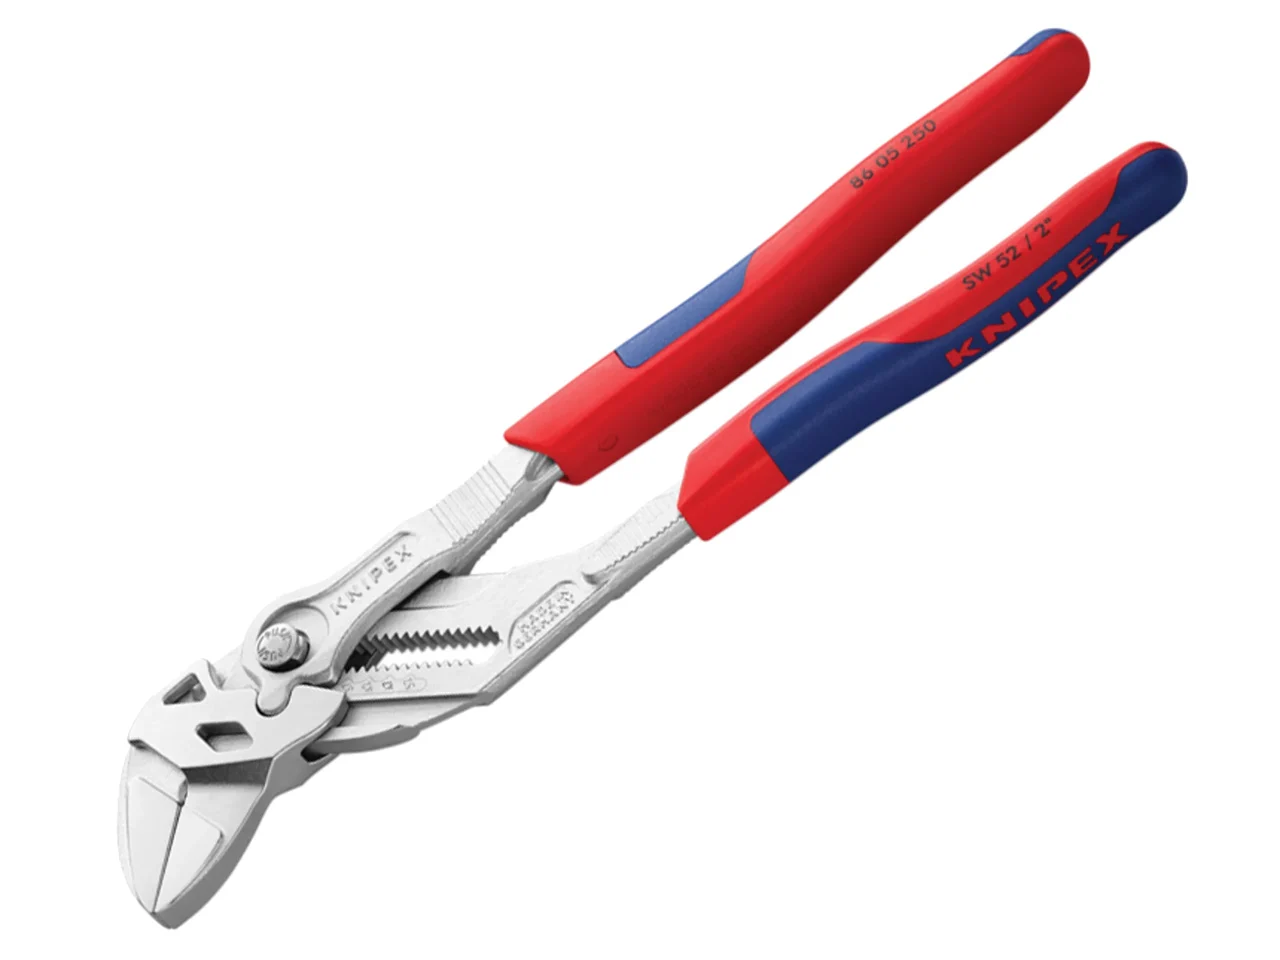 Knipex Knipex 8605250 0-52mm Soft Grip Smooth Jaw Pliers | ffx